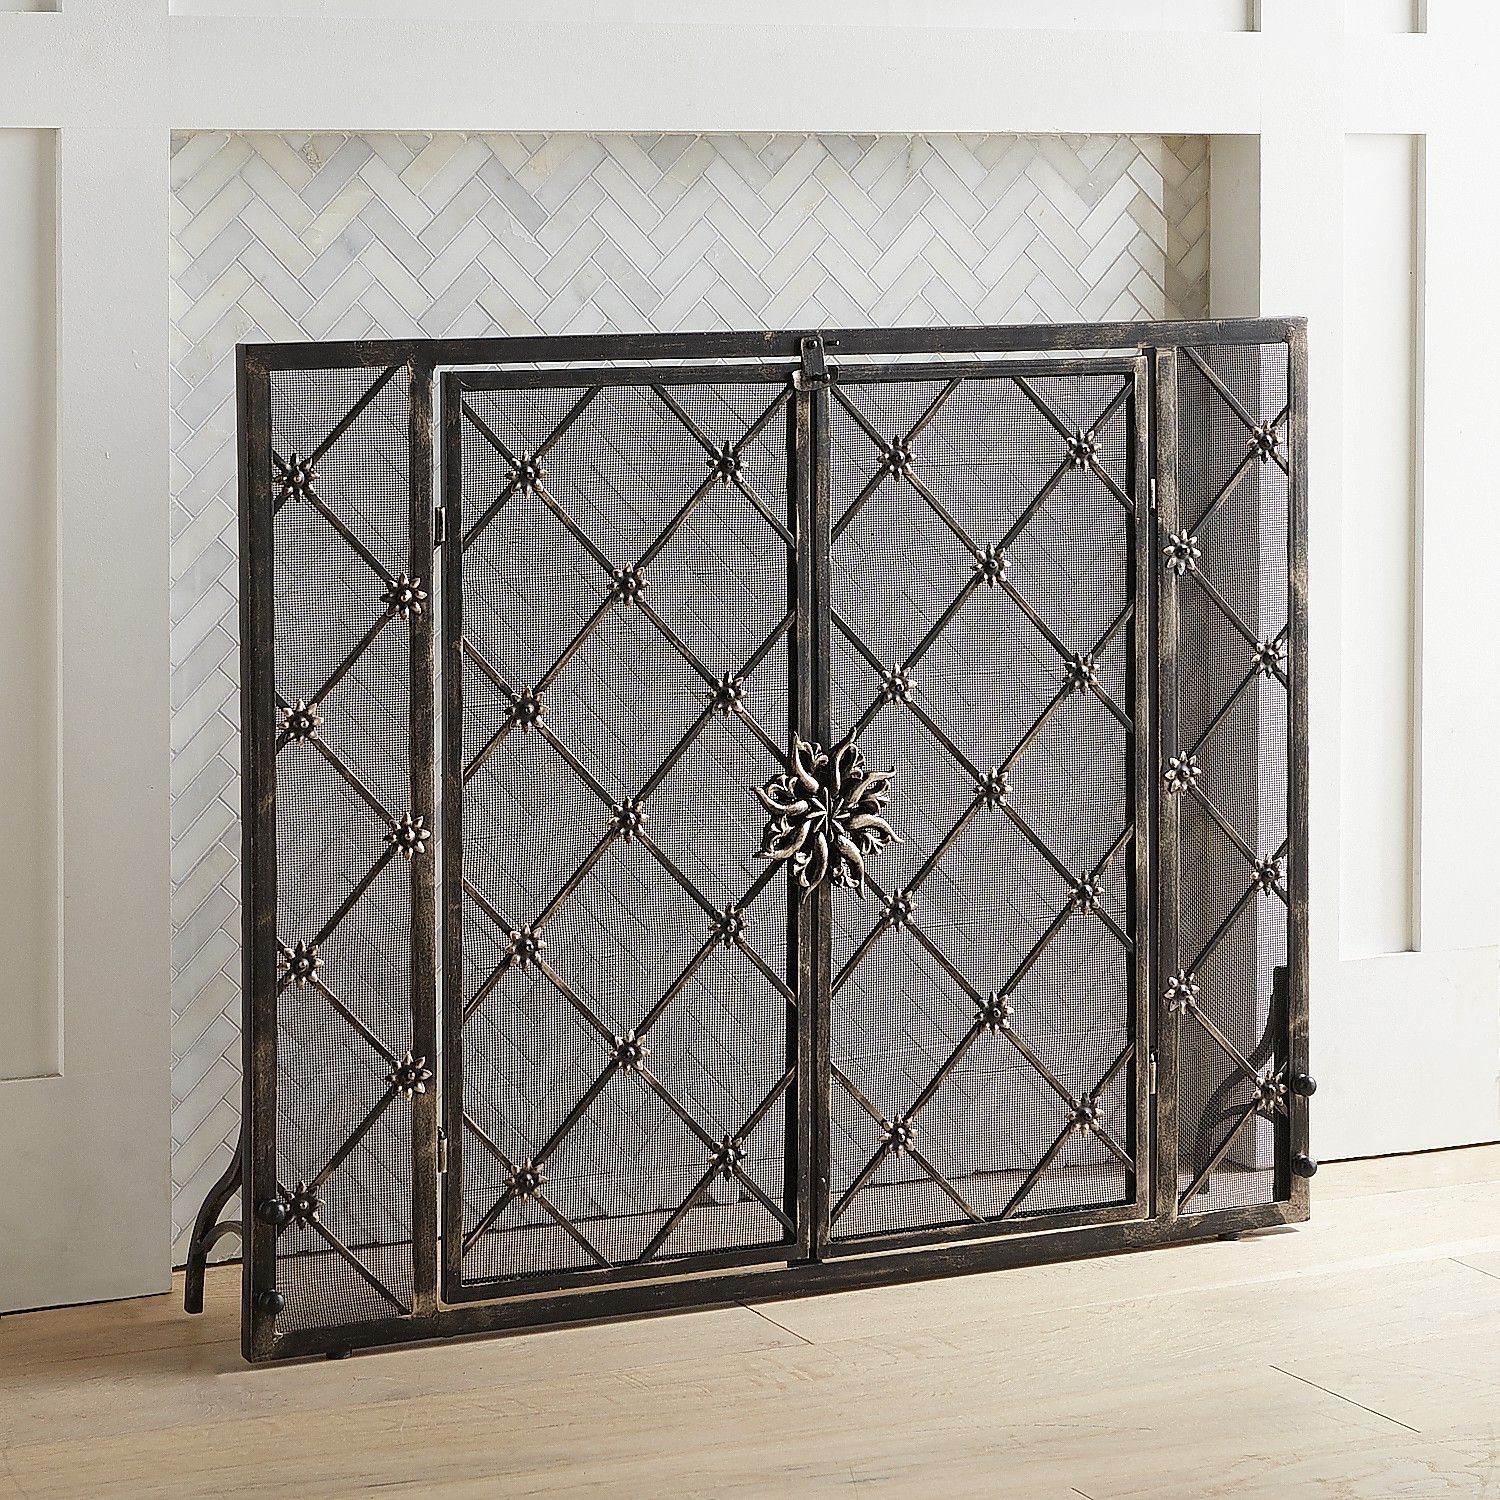 Horchow Fireplace Screen New Junction Fireplace Screen In 2019 Products